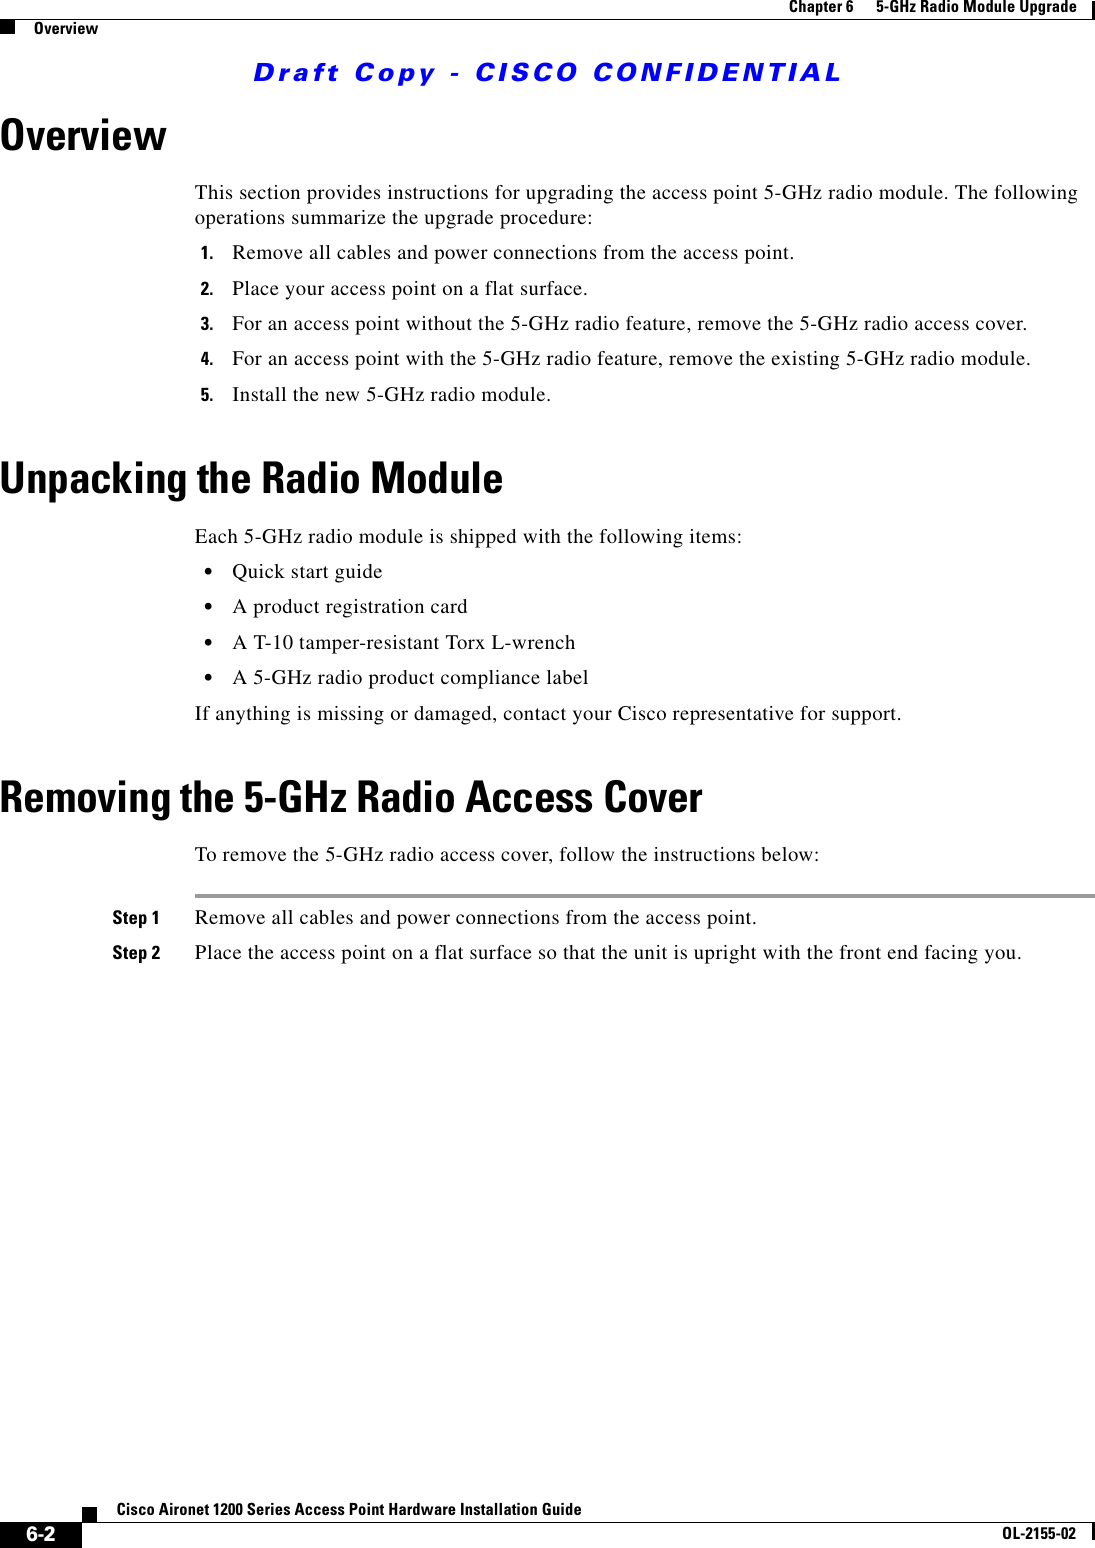 Draft Copy - CISCO CONFIDENTIAL 6-2Cisco Aironet 1200 Series Access Point Hardware Installation GuideOL-2155-02Chapter 6      5-GHz Radio Module UpgradeOverviewOverviewThis section provides instructions for upgrading the access point 5-GHz radio module. The following operations summarize the upgrade procedure: 1. Remove all cables and power connections from the access point.2. Place your access point on a flat surface.3. For an access point without the 5-GHz radio feature, remove the 5-GHz radio access cover.4. For an access point with the 5-GHz radio feature, remove the existing 5-GHz radio module.5. Install the new 5-GHz radio module.Unpacking the Radio ModuleEach 5-GHz radio module is shipped with the following items:•Quick start guide•A product registration card•A T-10 tamper-resistant Torx L-wrench•A 5-GHz radio product compliance labelIf anything is missing or damaged, contact your Cisco representative for support.Removing the 5-GHz Radio Access CoverTo remove the 5-GHz radio access cover, follow the instructions below:Step 1 Remove all cables and power connections from the access point.Step 2 Place the access point on a flat surface so that the unit is upright with the front end facing you.